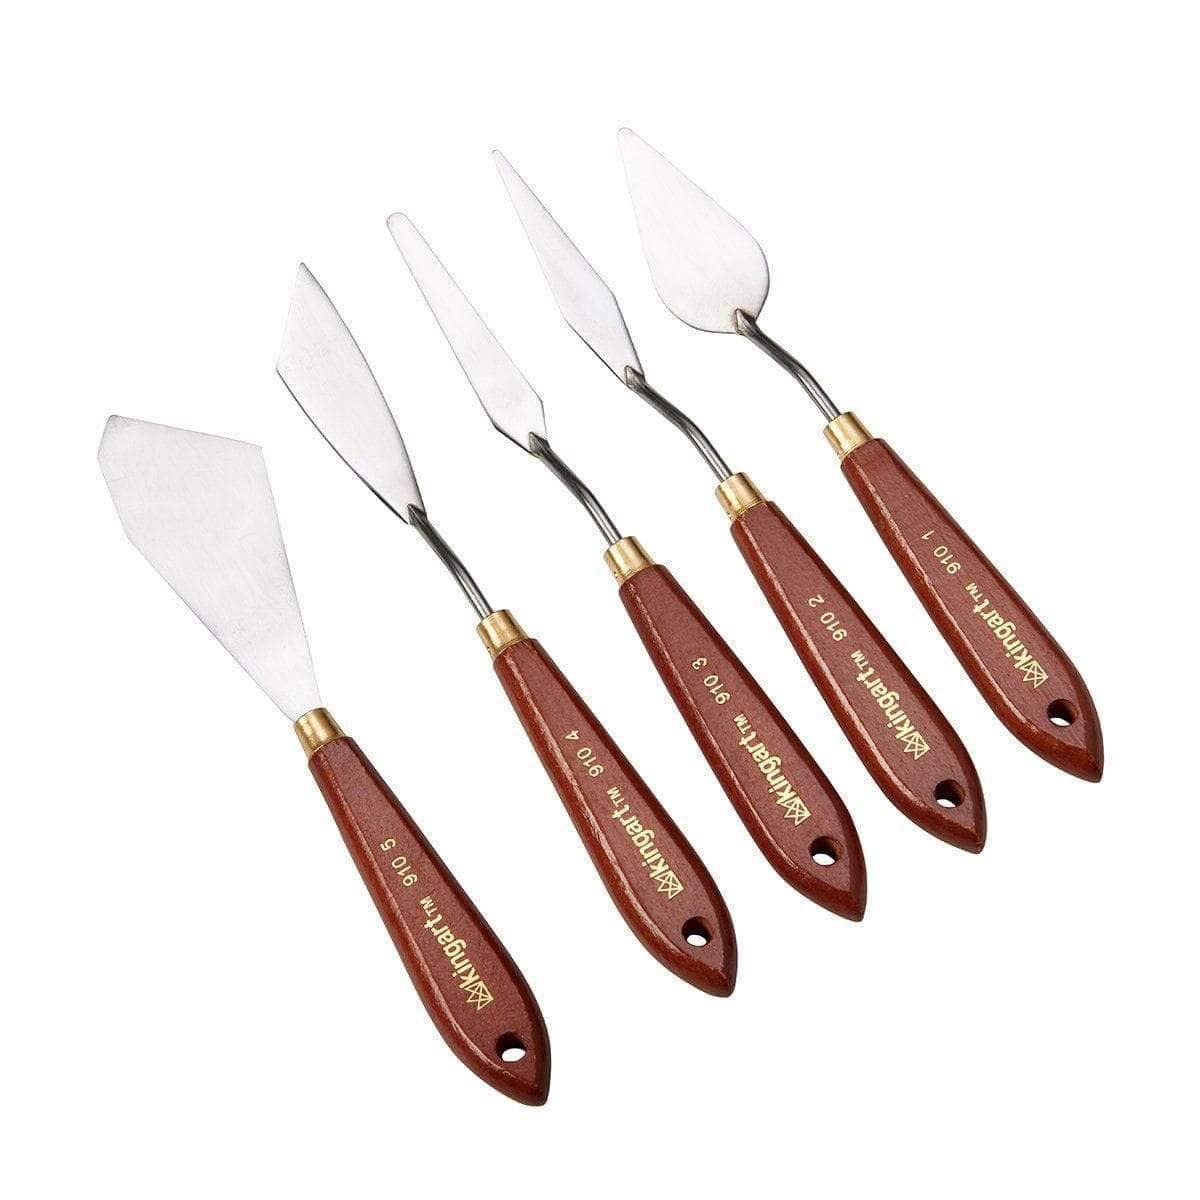 Painter's Edge Stainless Steel Painting Knife Style 23T (3-7/8 Blade)